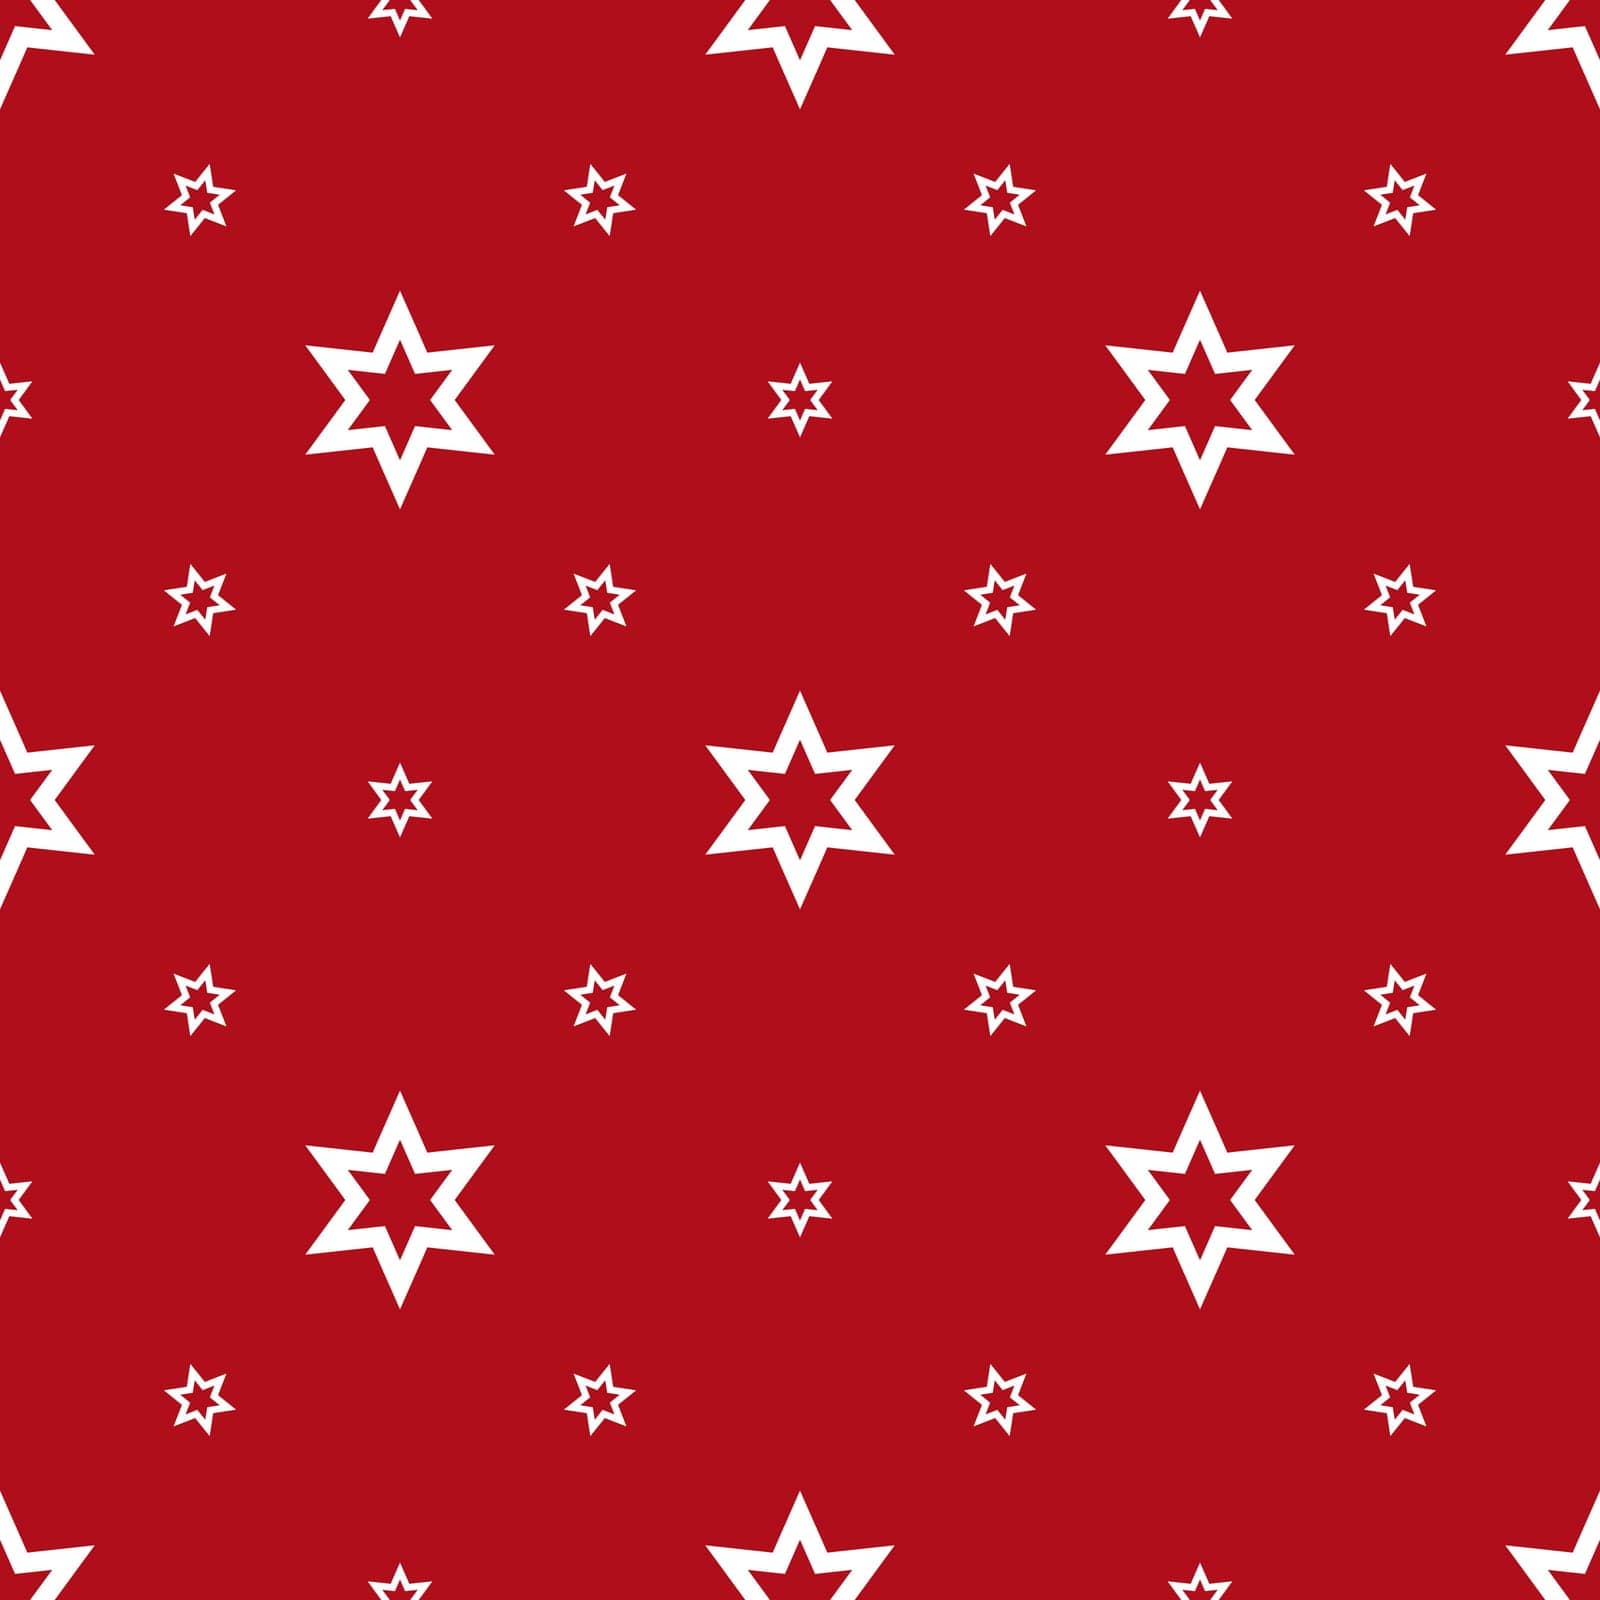 Seamless pattern of white stars on a red backdrop by Dustick